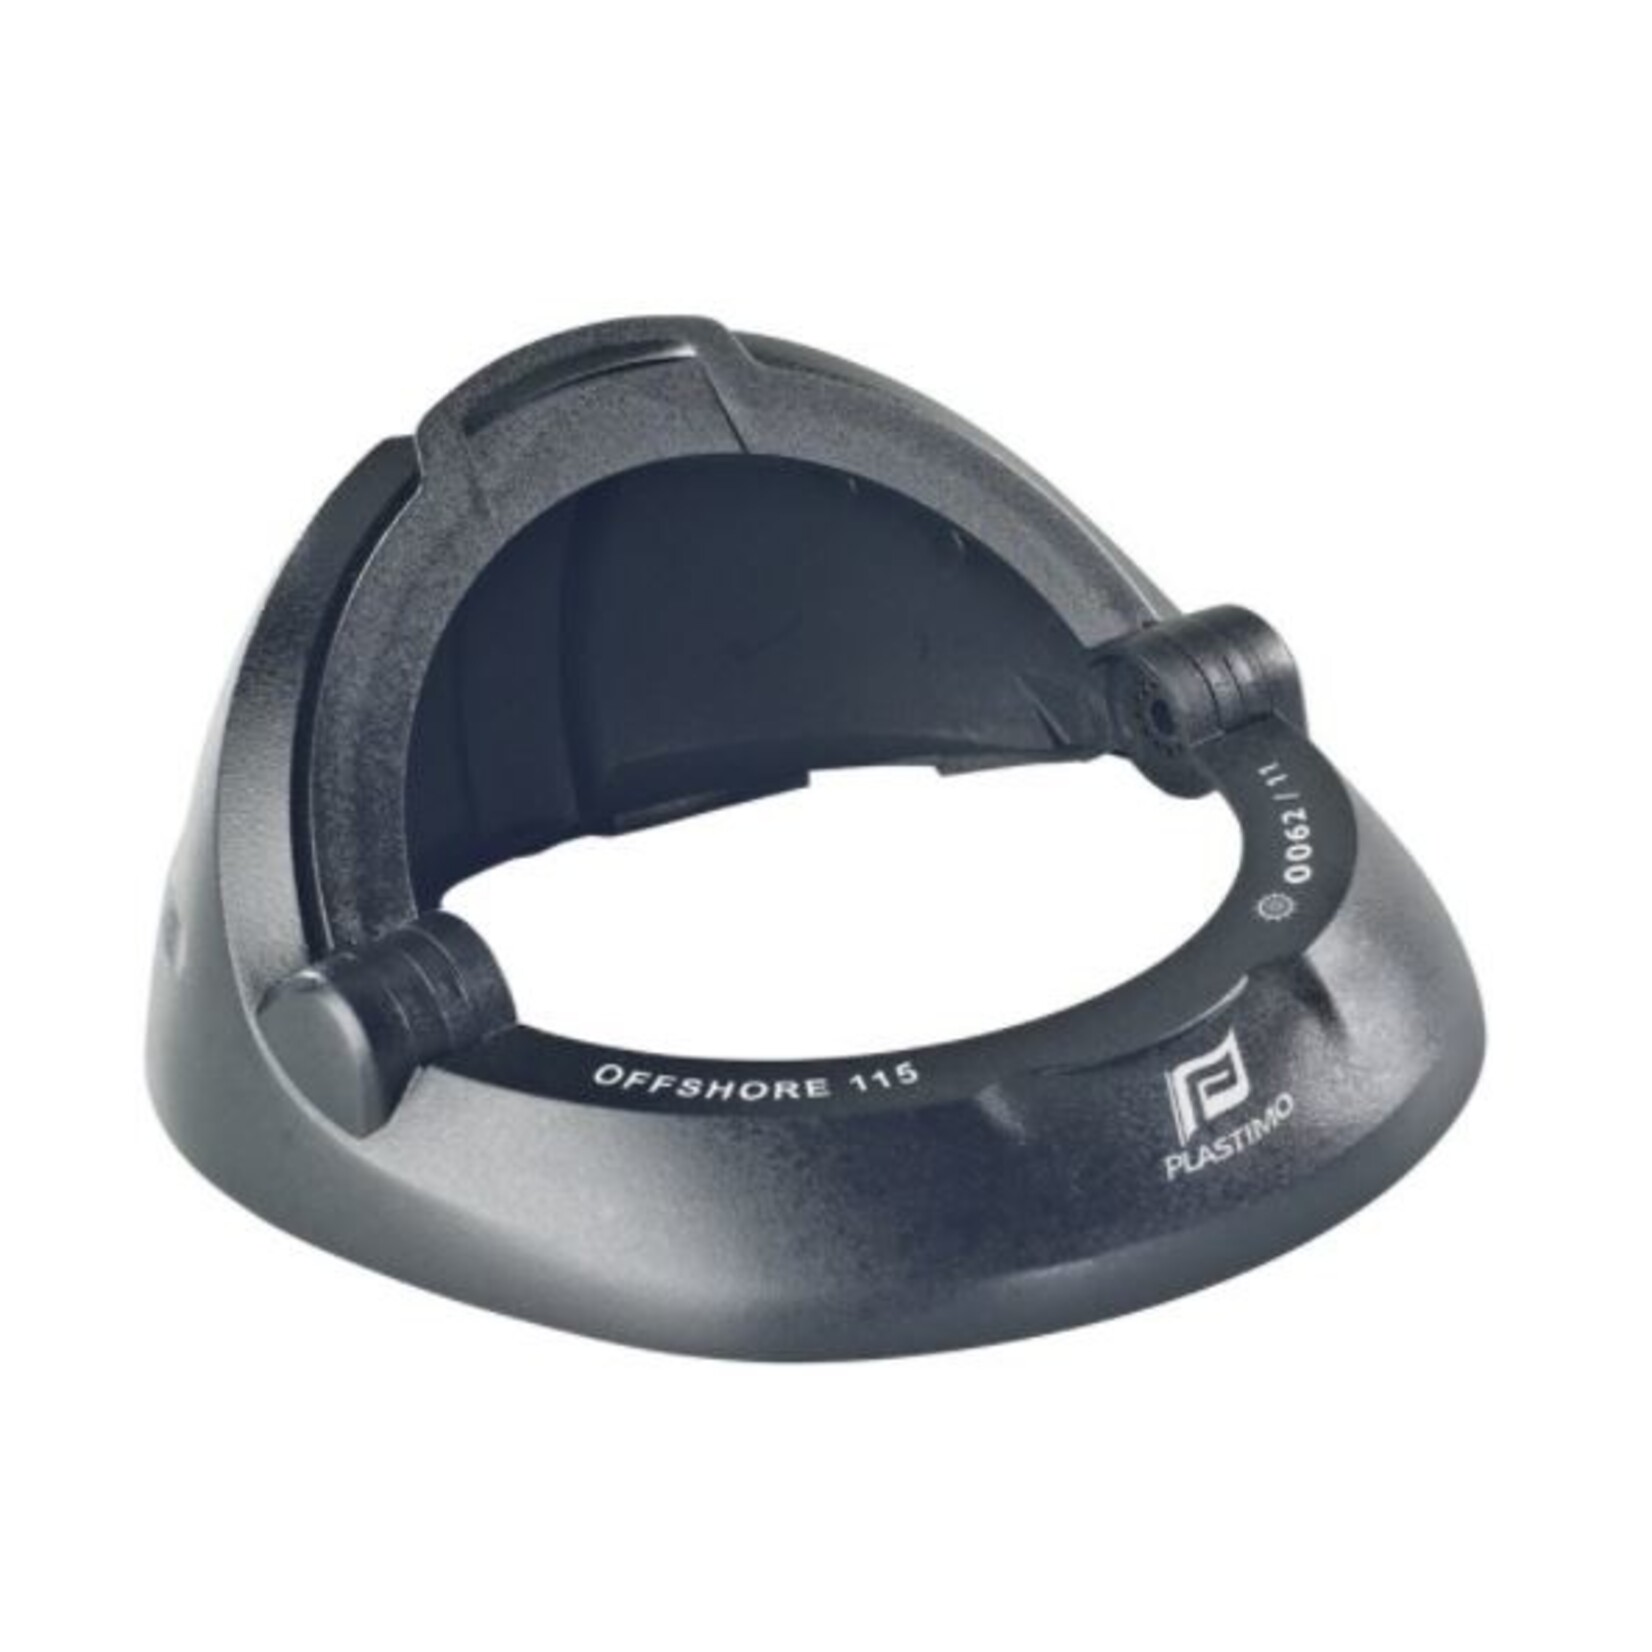 Plastimo Protect. cover bla for compass off115